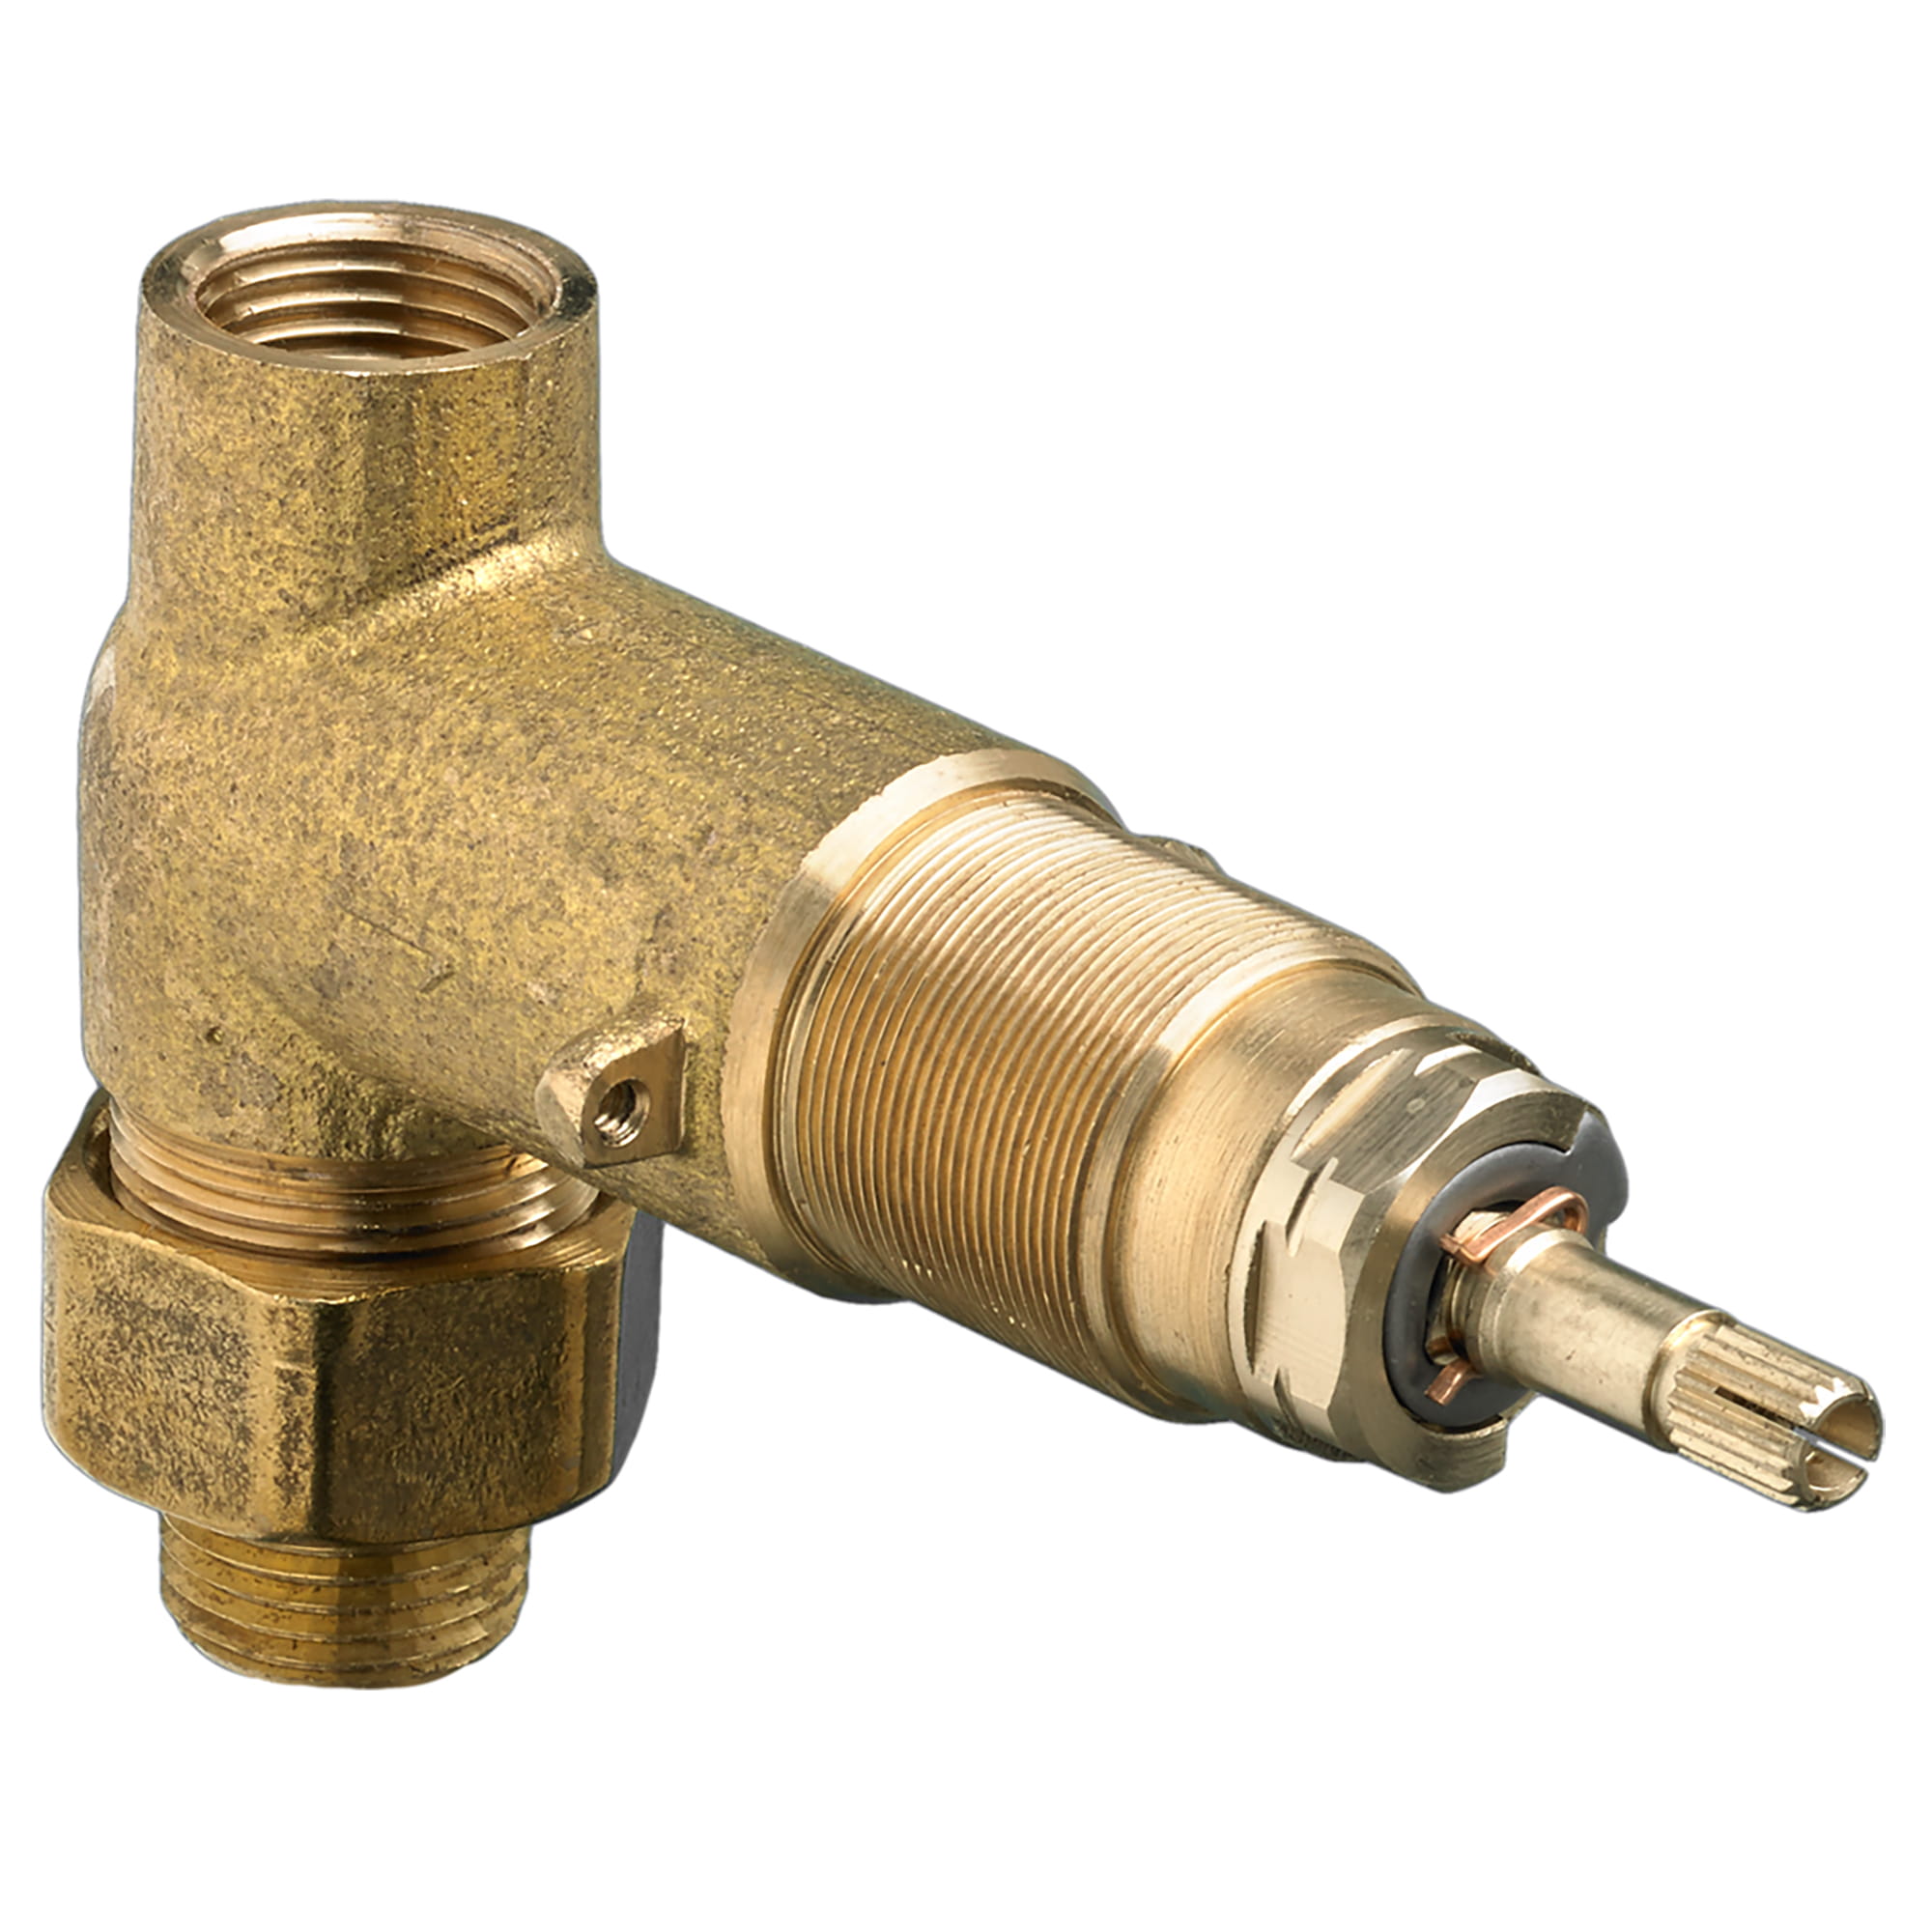 3/4-Inch (19 mm) On/Off Control Rough-In Valve